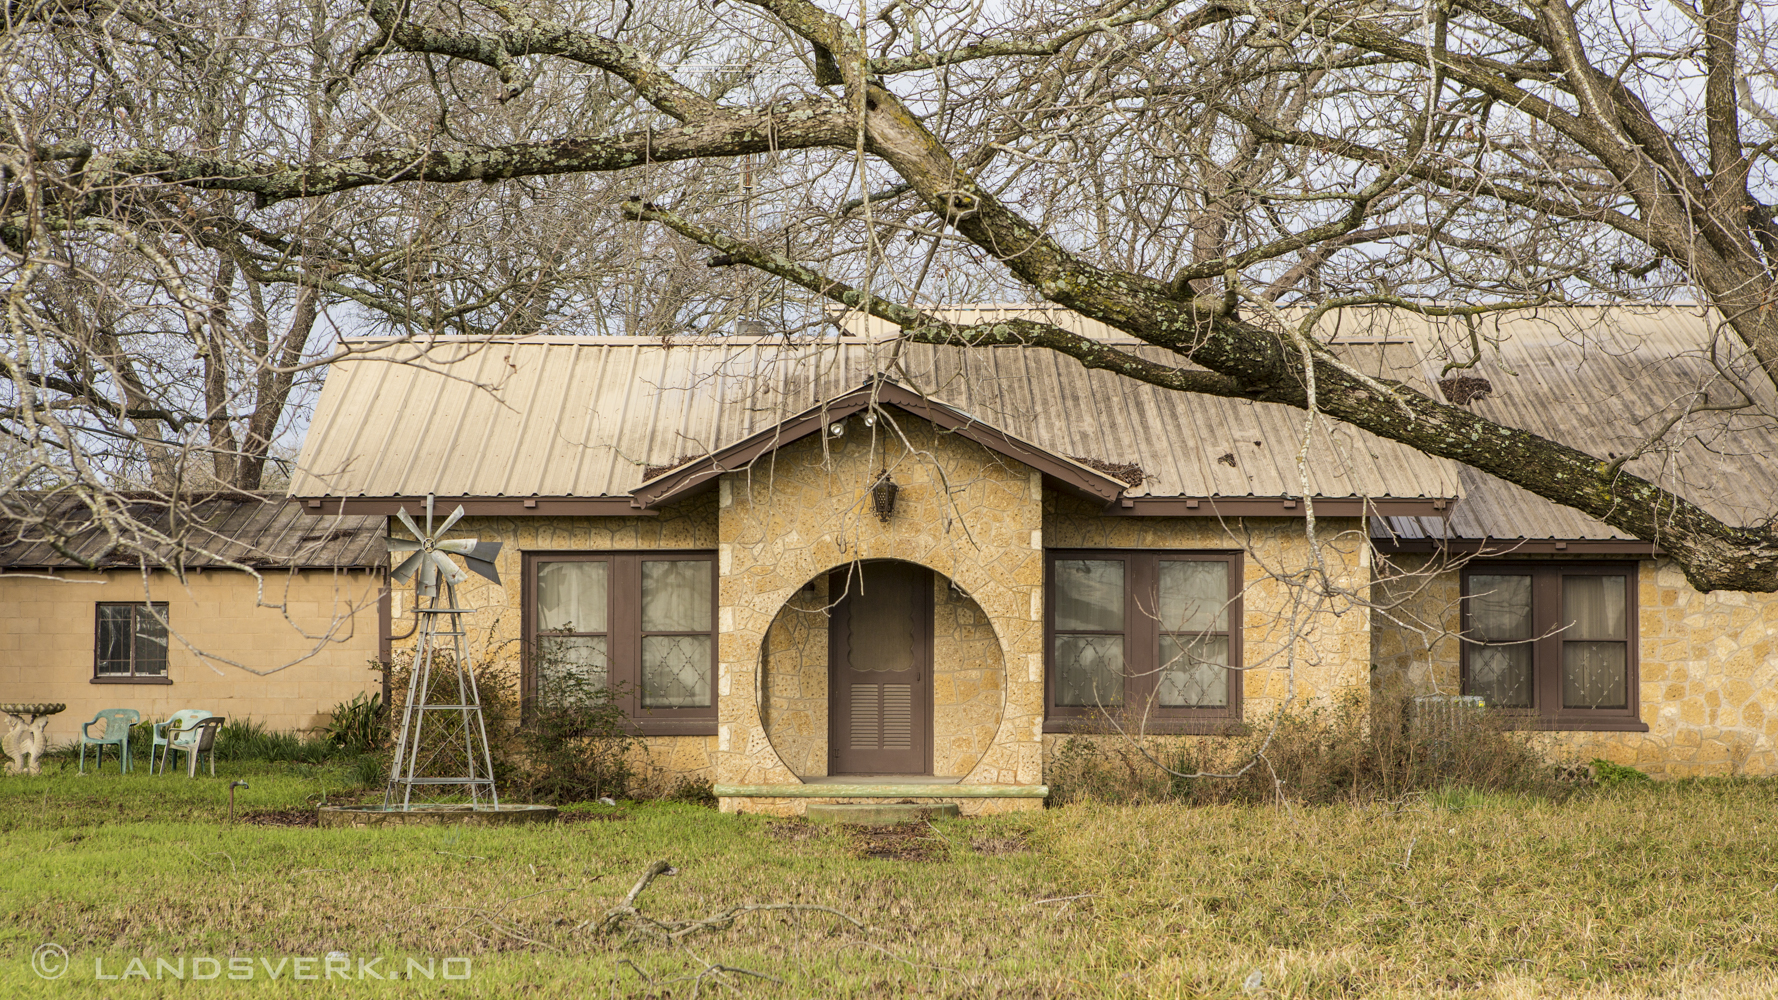 Texas Hill Country. 

(Canon EOS 5D Mark III / Canon EF 24-70mm f/2.8 L USM